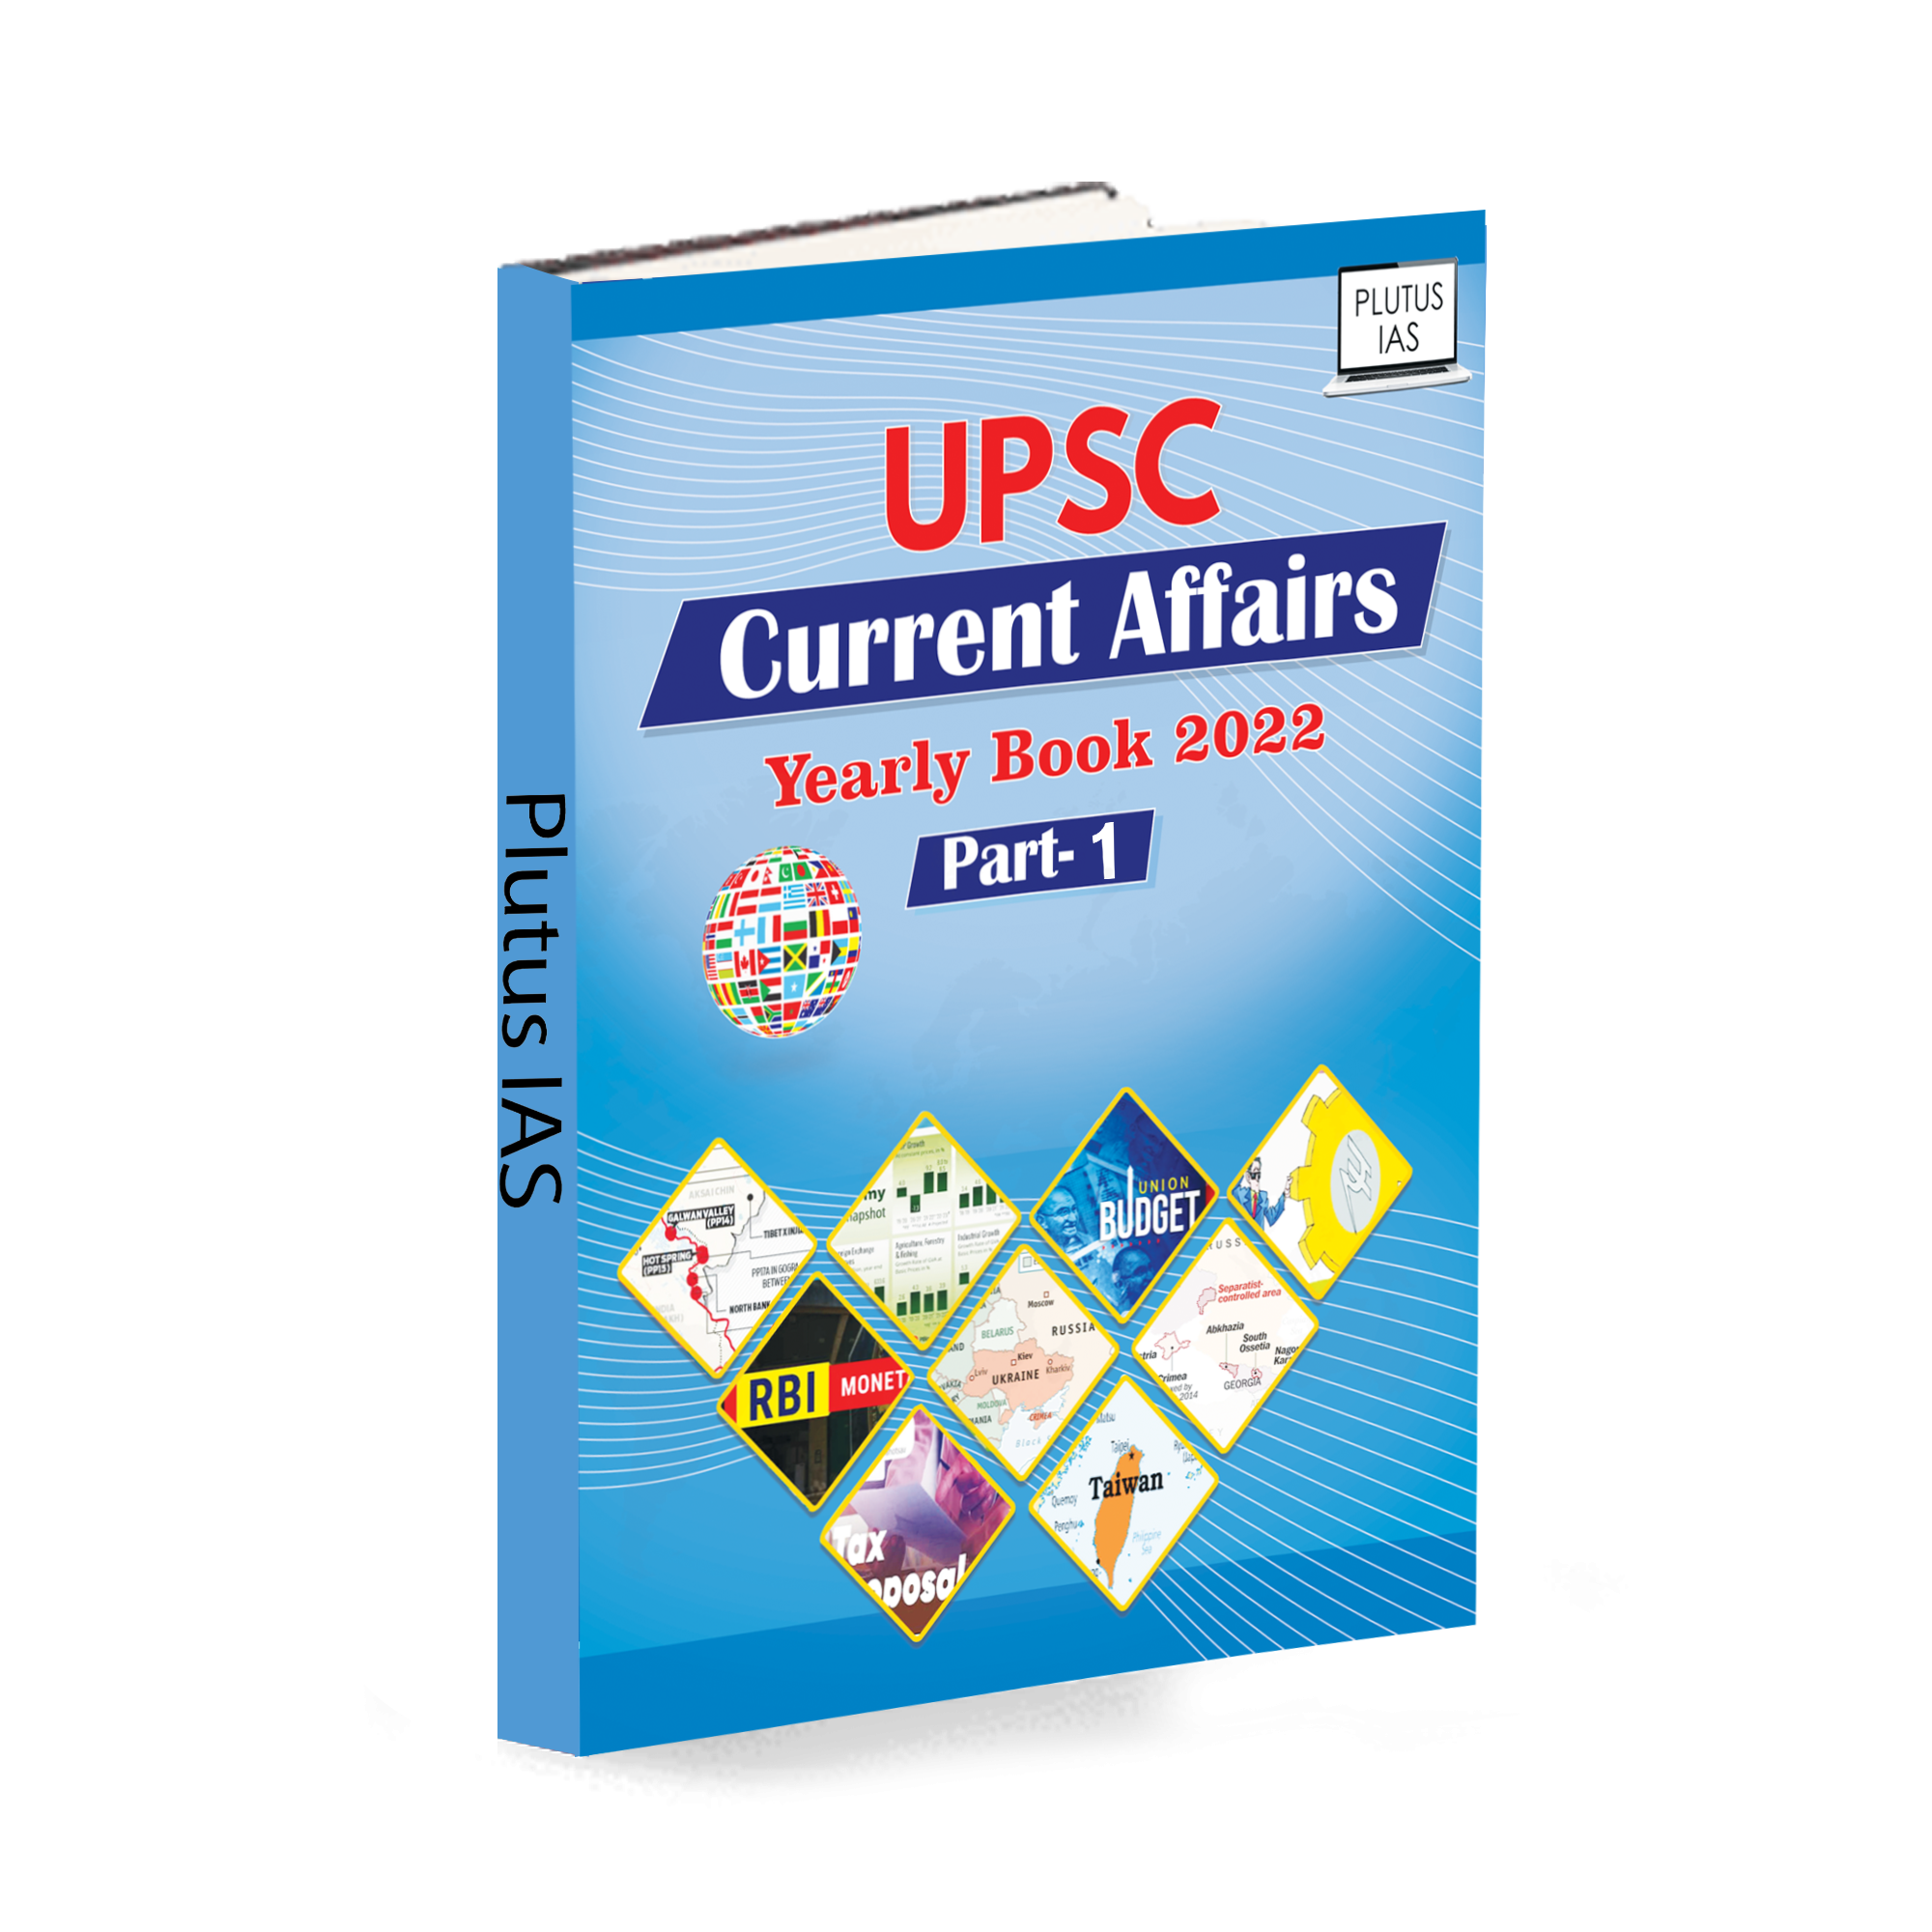 upsc-current-affairs-today-yearly-2022-part-1-the-hinduzone